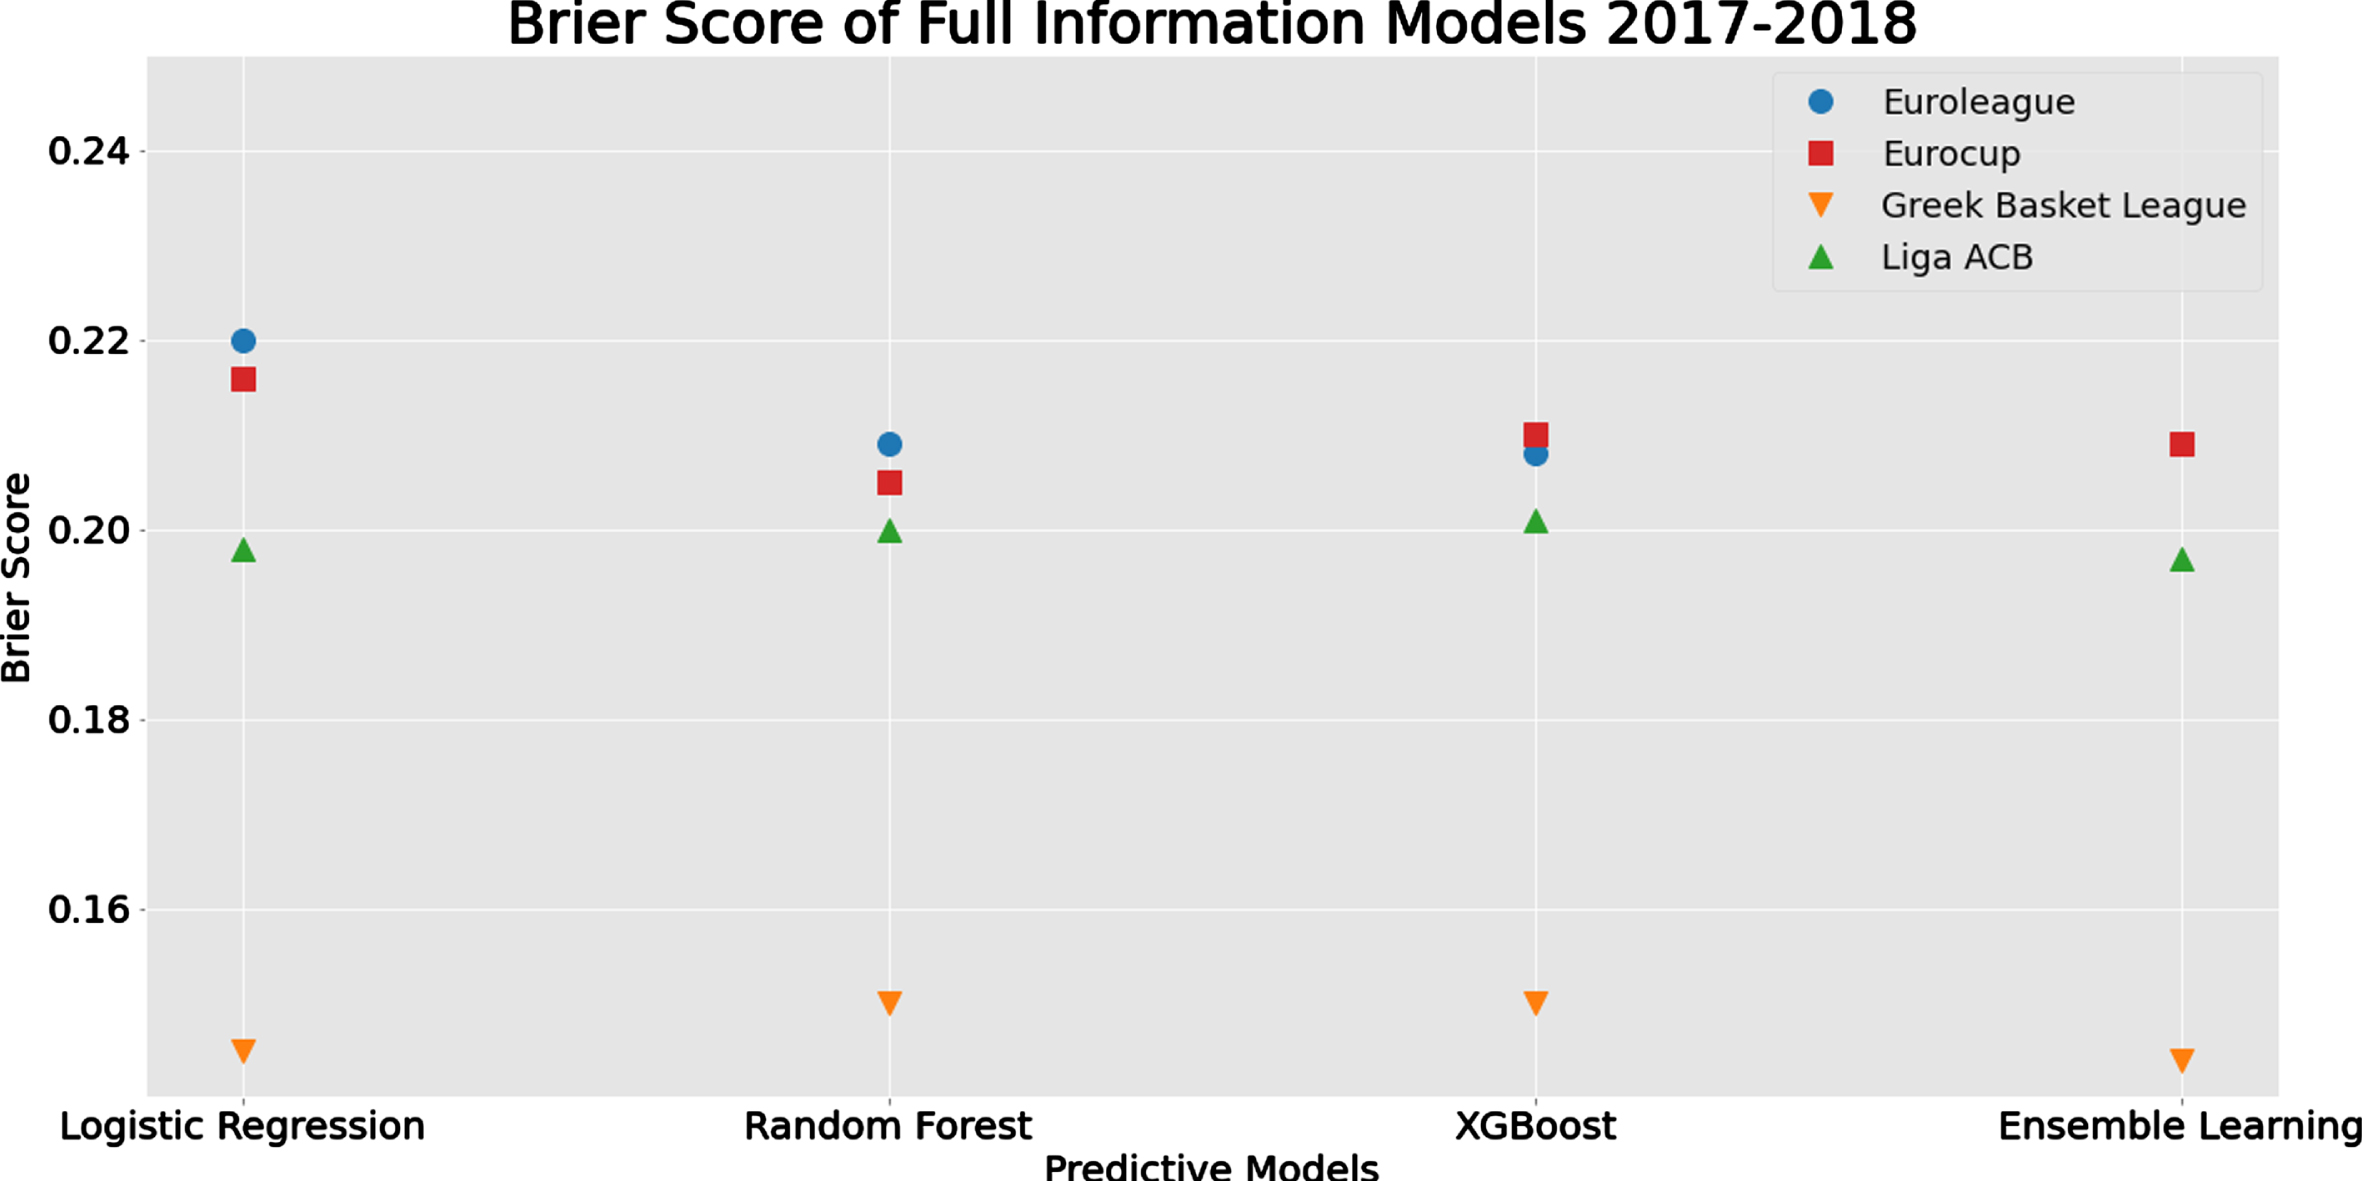 Comparison of methods and algorithms in terms of Brier Score for Full Information Models for each tournament for the full season prediction scenario.